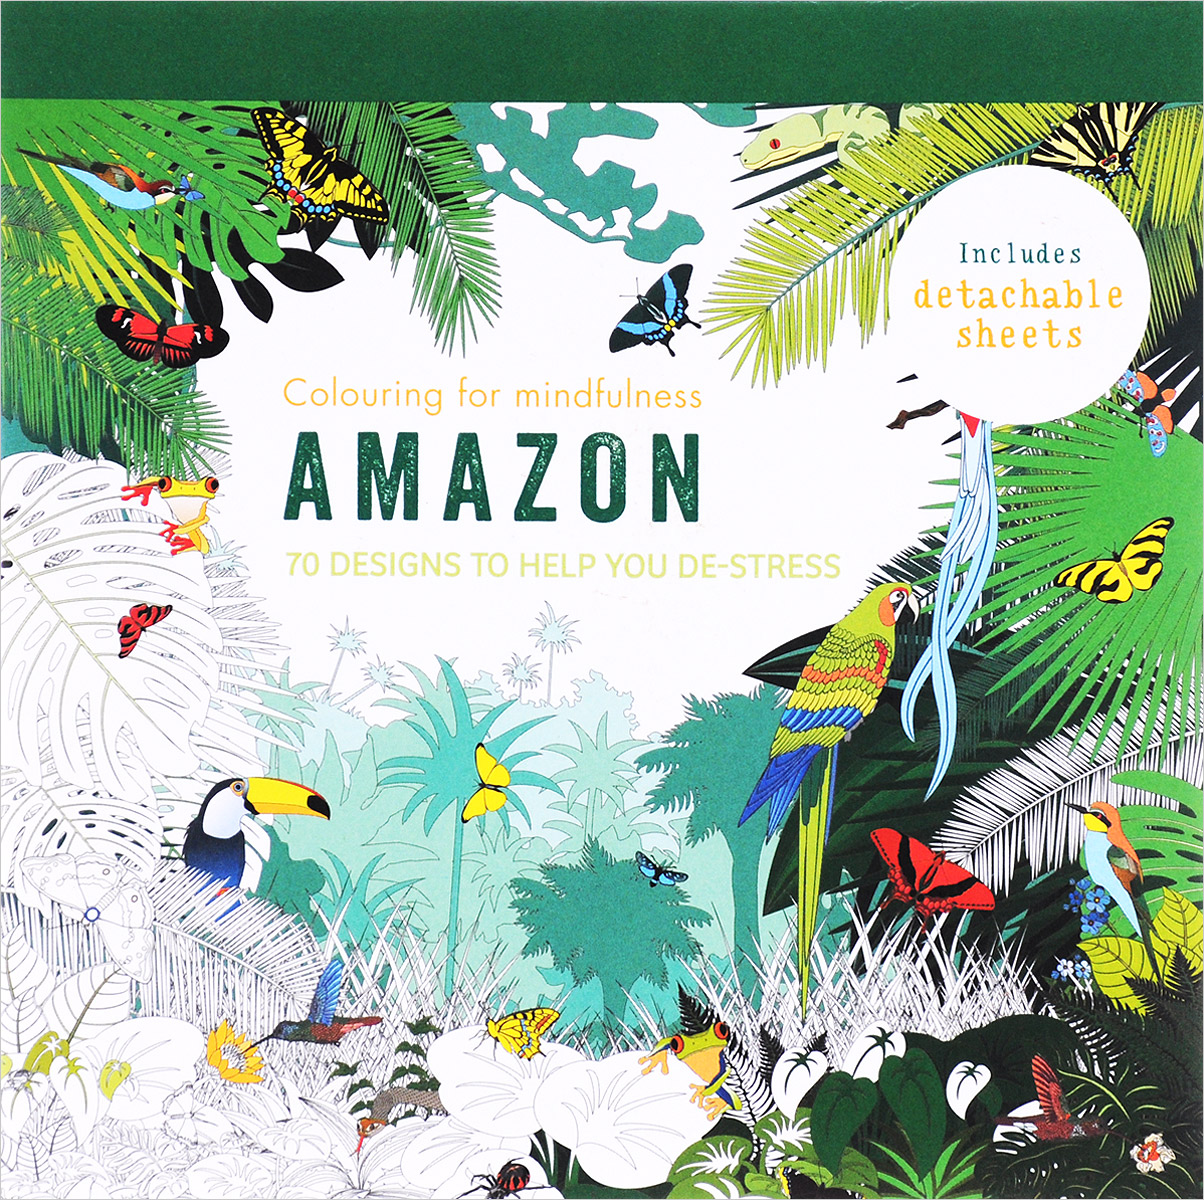 Colouring for Mindfulness: Amazon: 70 Designs to Help You De-Stress